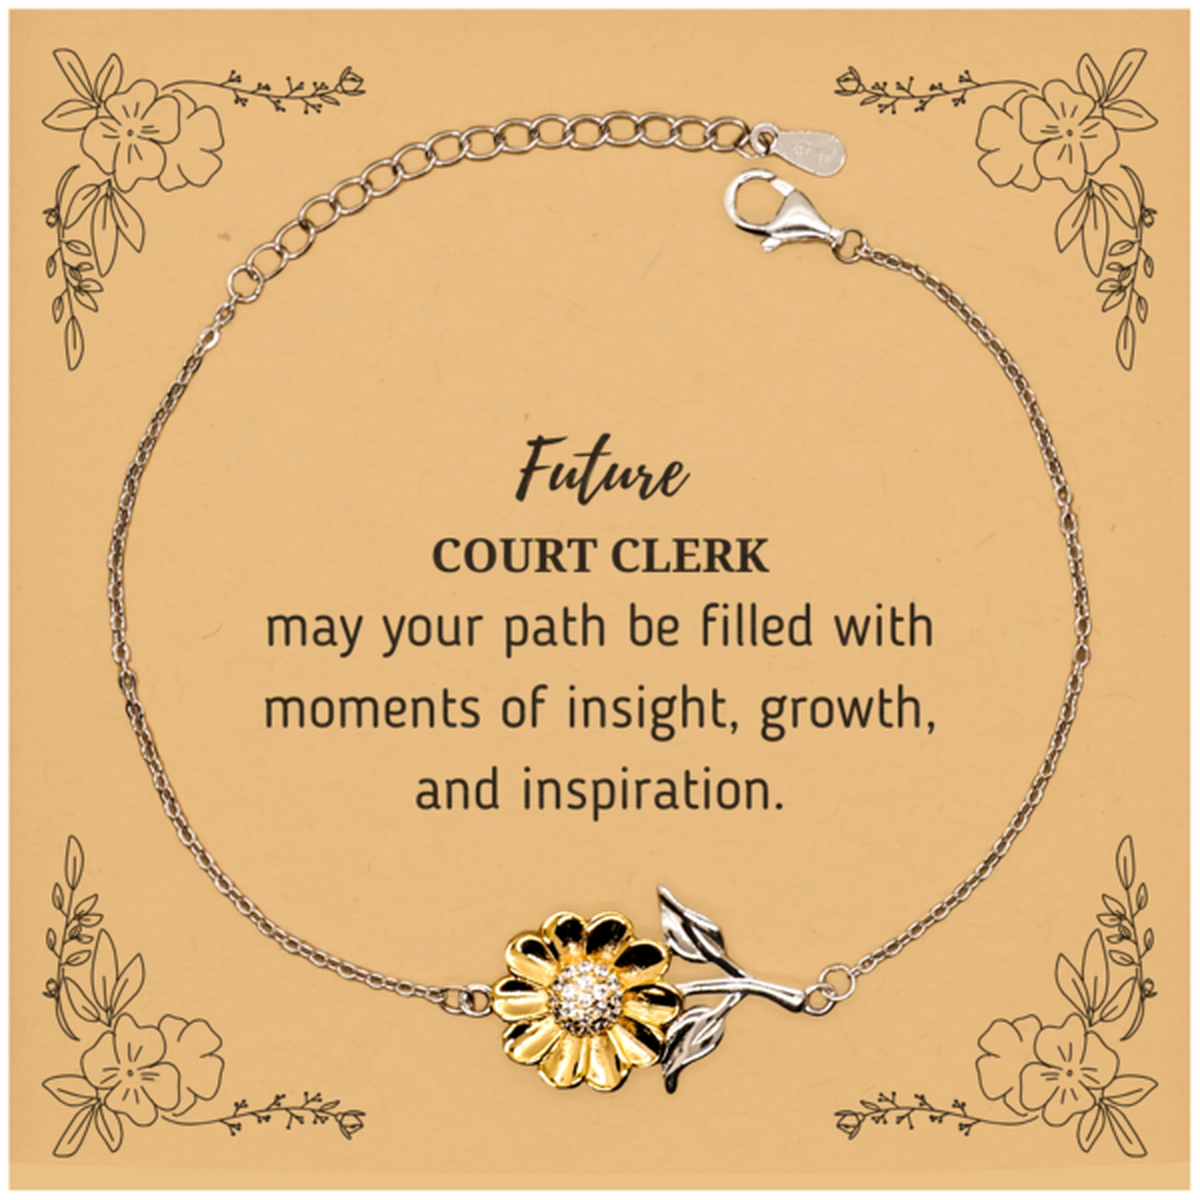 Future Court Clerk Gifts, May your path be filled with moments of insight, Graduation Gifts for New Court Clerk, Christmas Unique Sunflower Bracelet For Men, Women, Friends